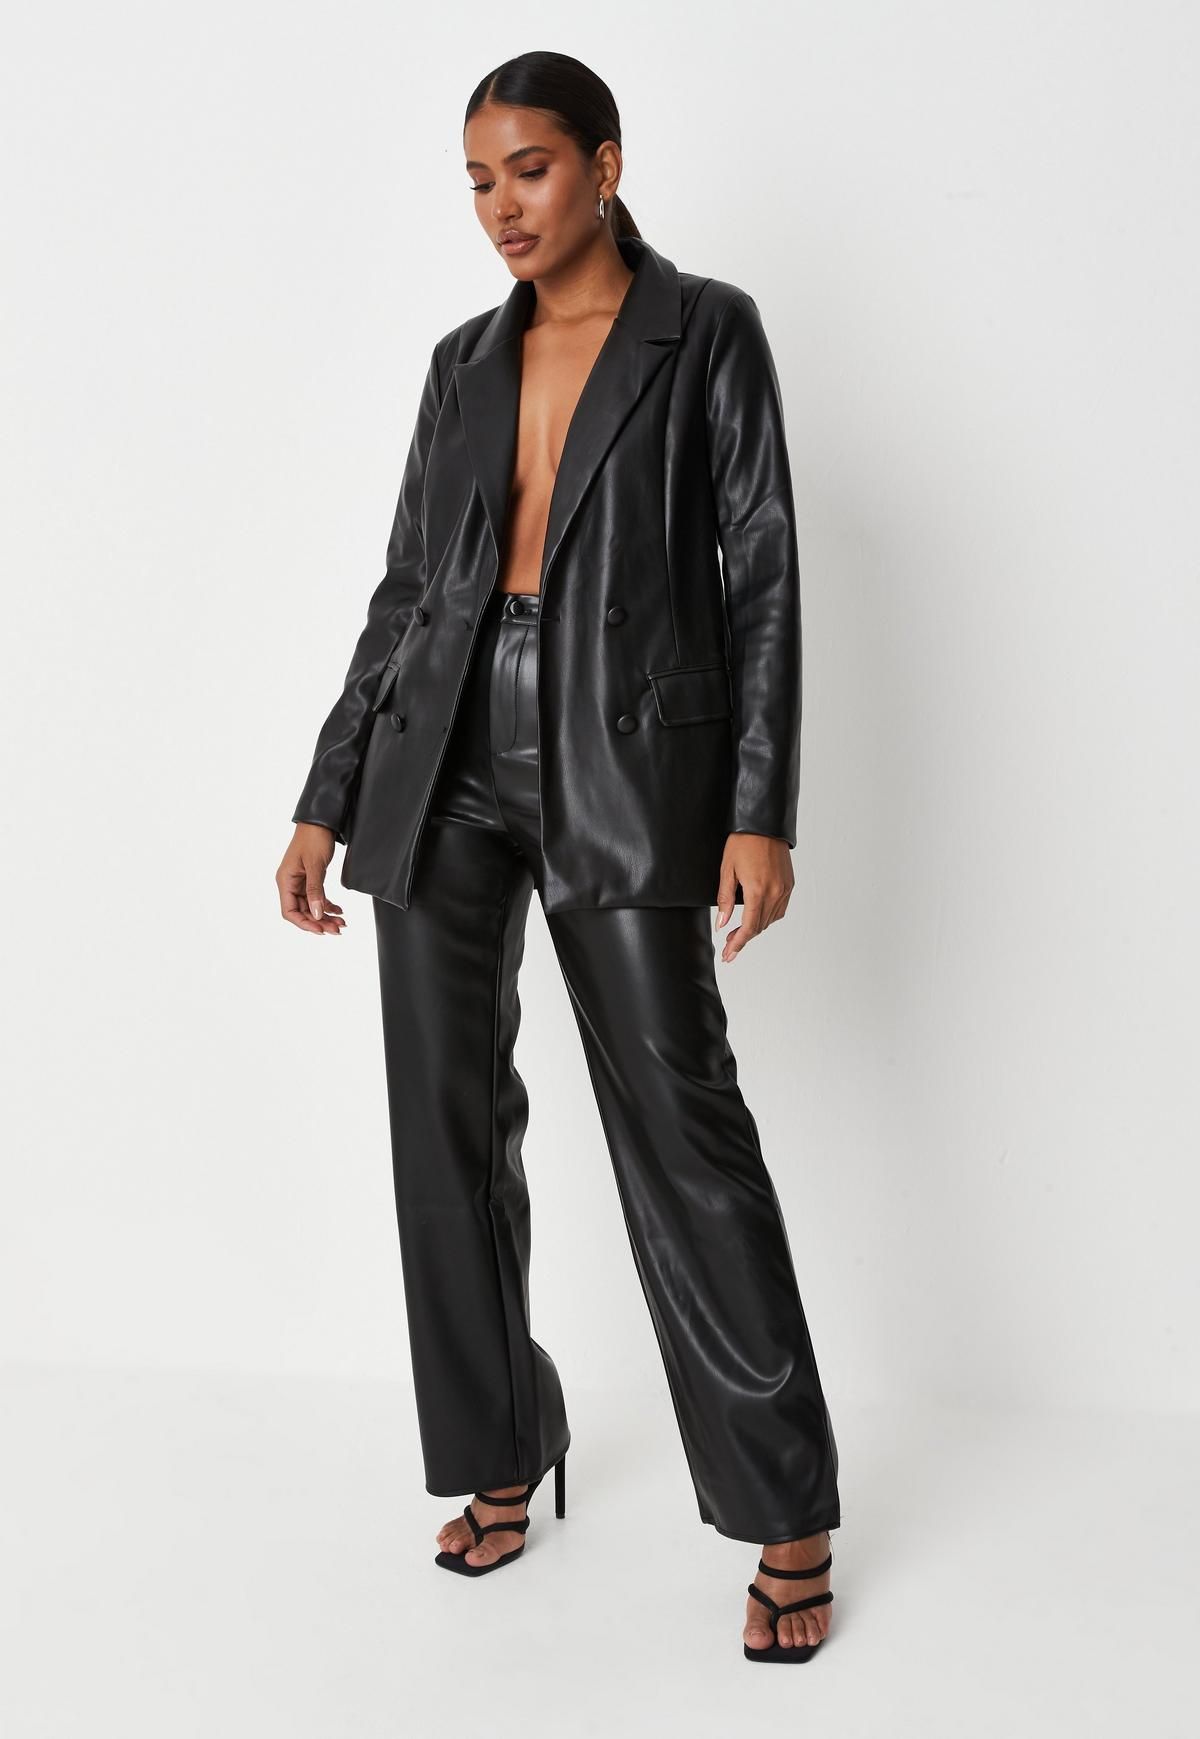 Missguided - Petite Black Soft Faux Leather Oversized Blazer | Missguided (US & CA)